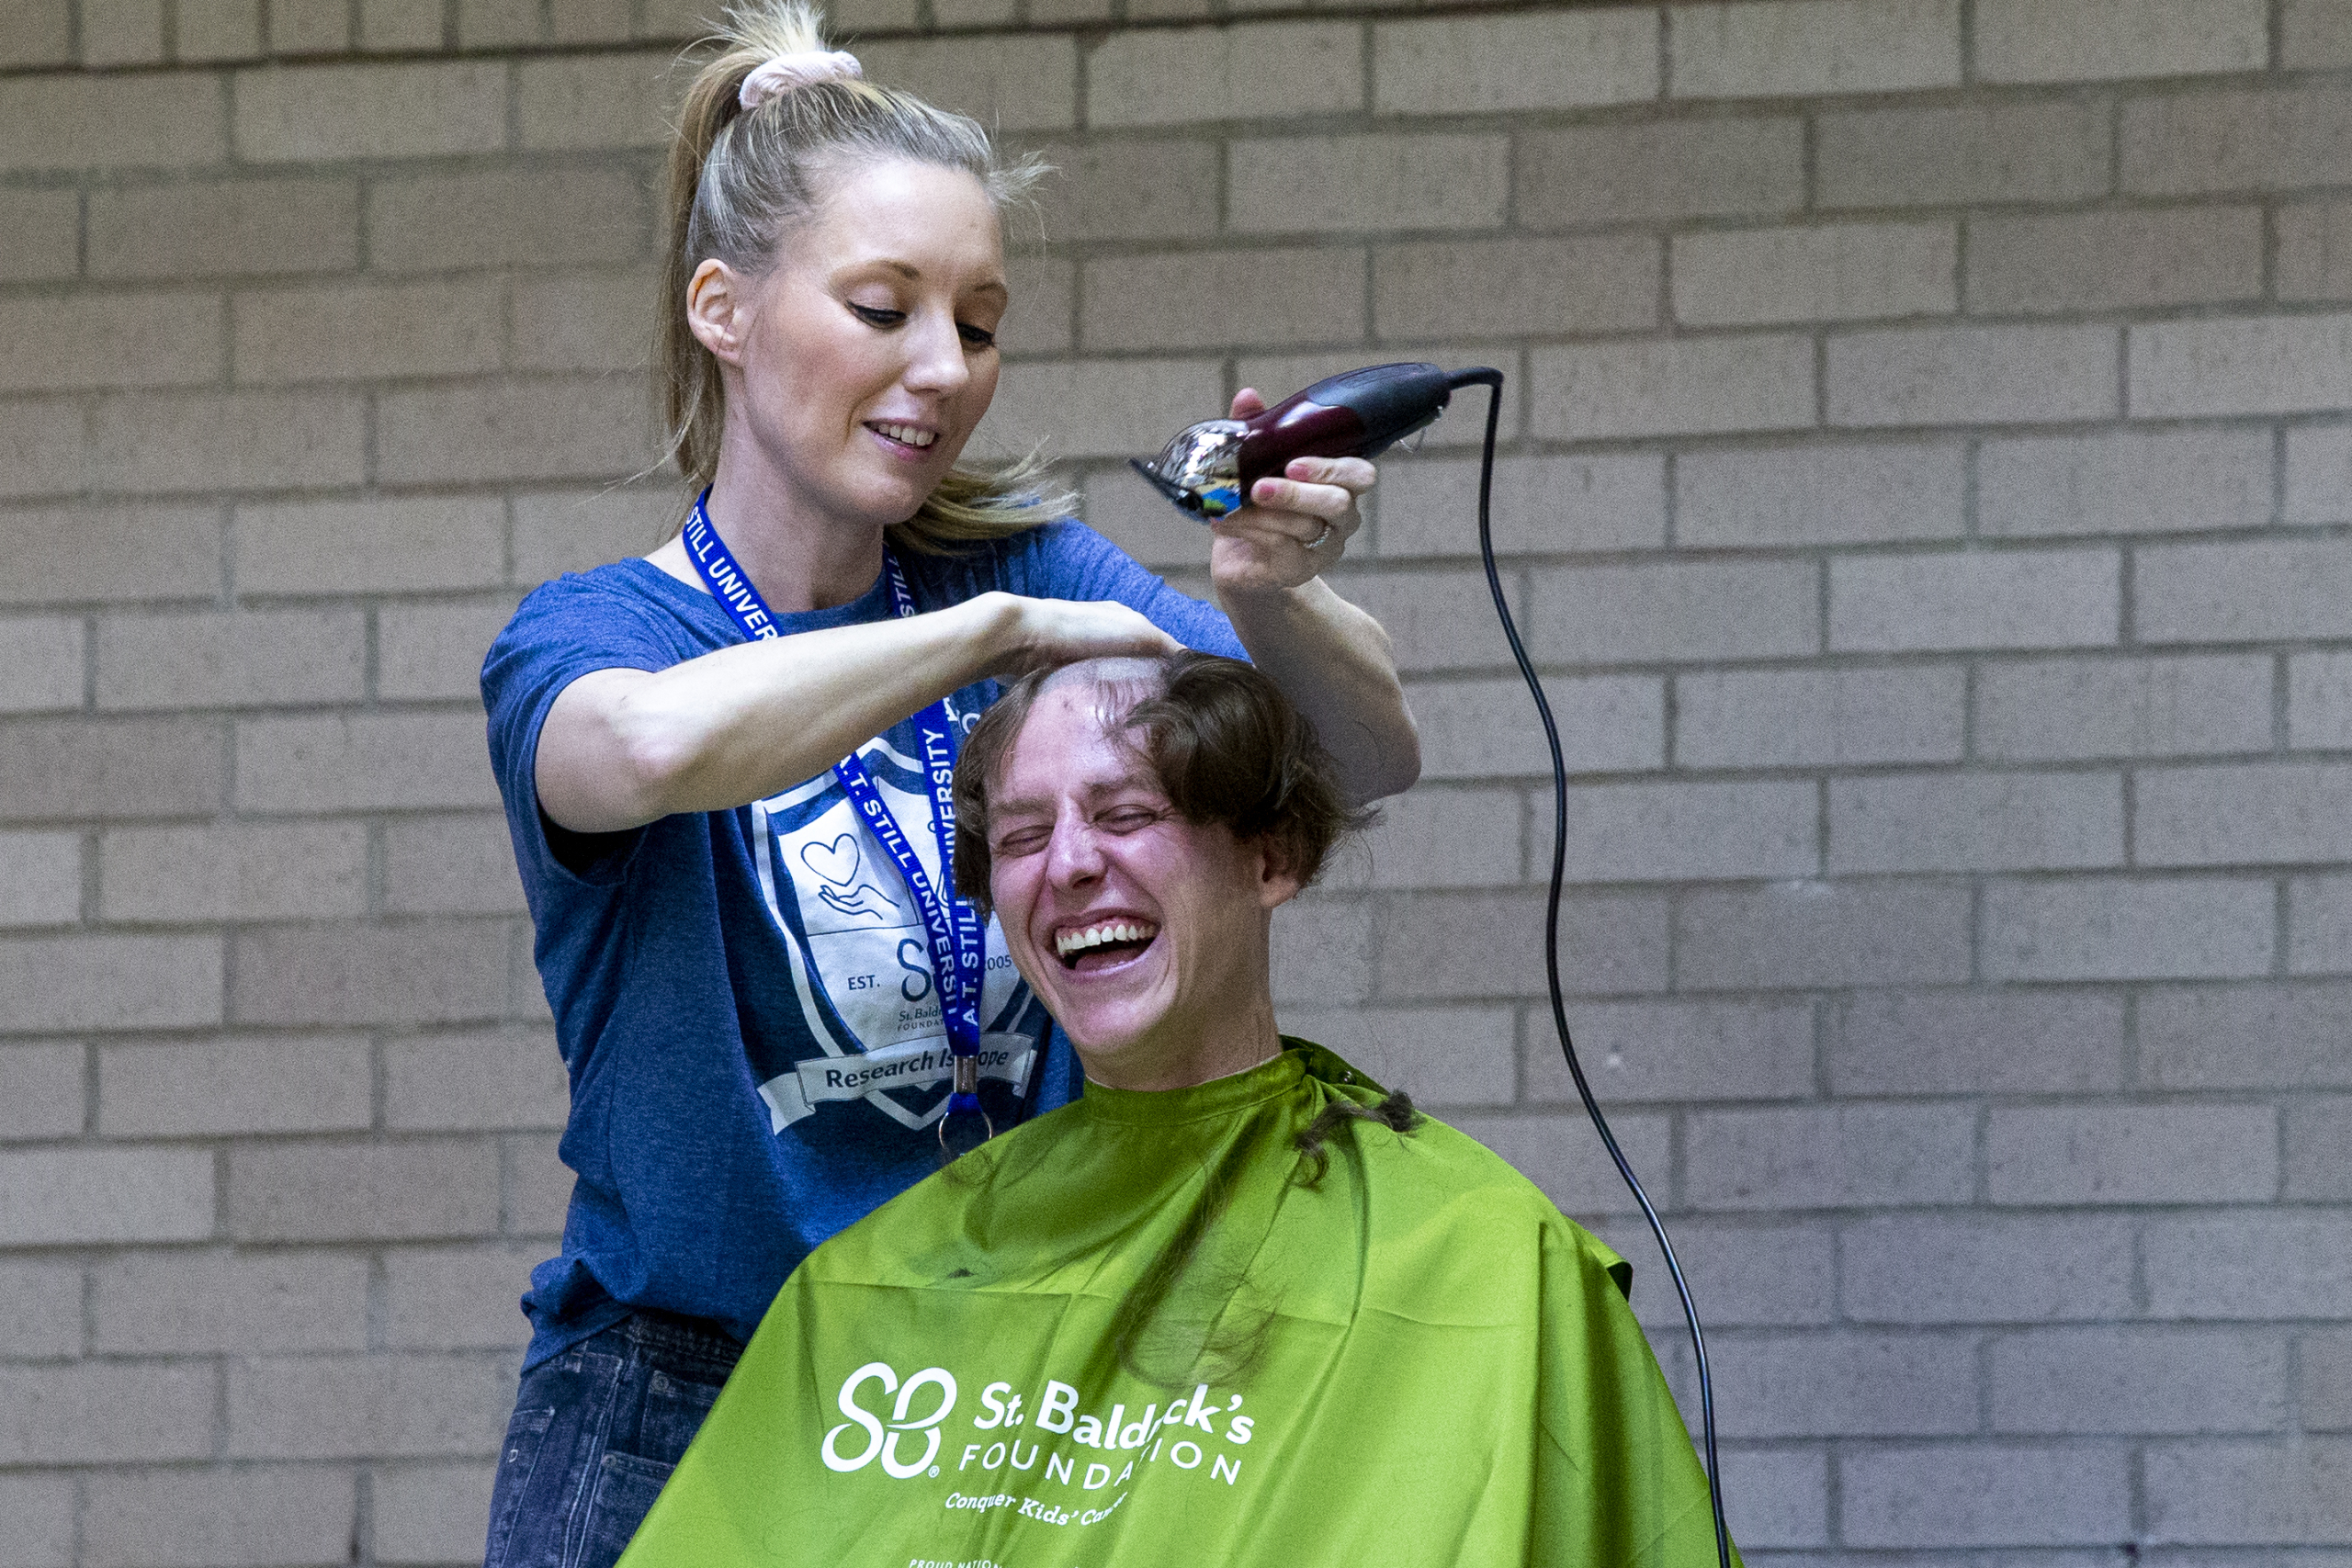 An individual smiles as his head is shaved during an event to benefit childhood cancer research